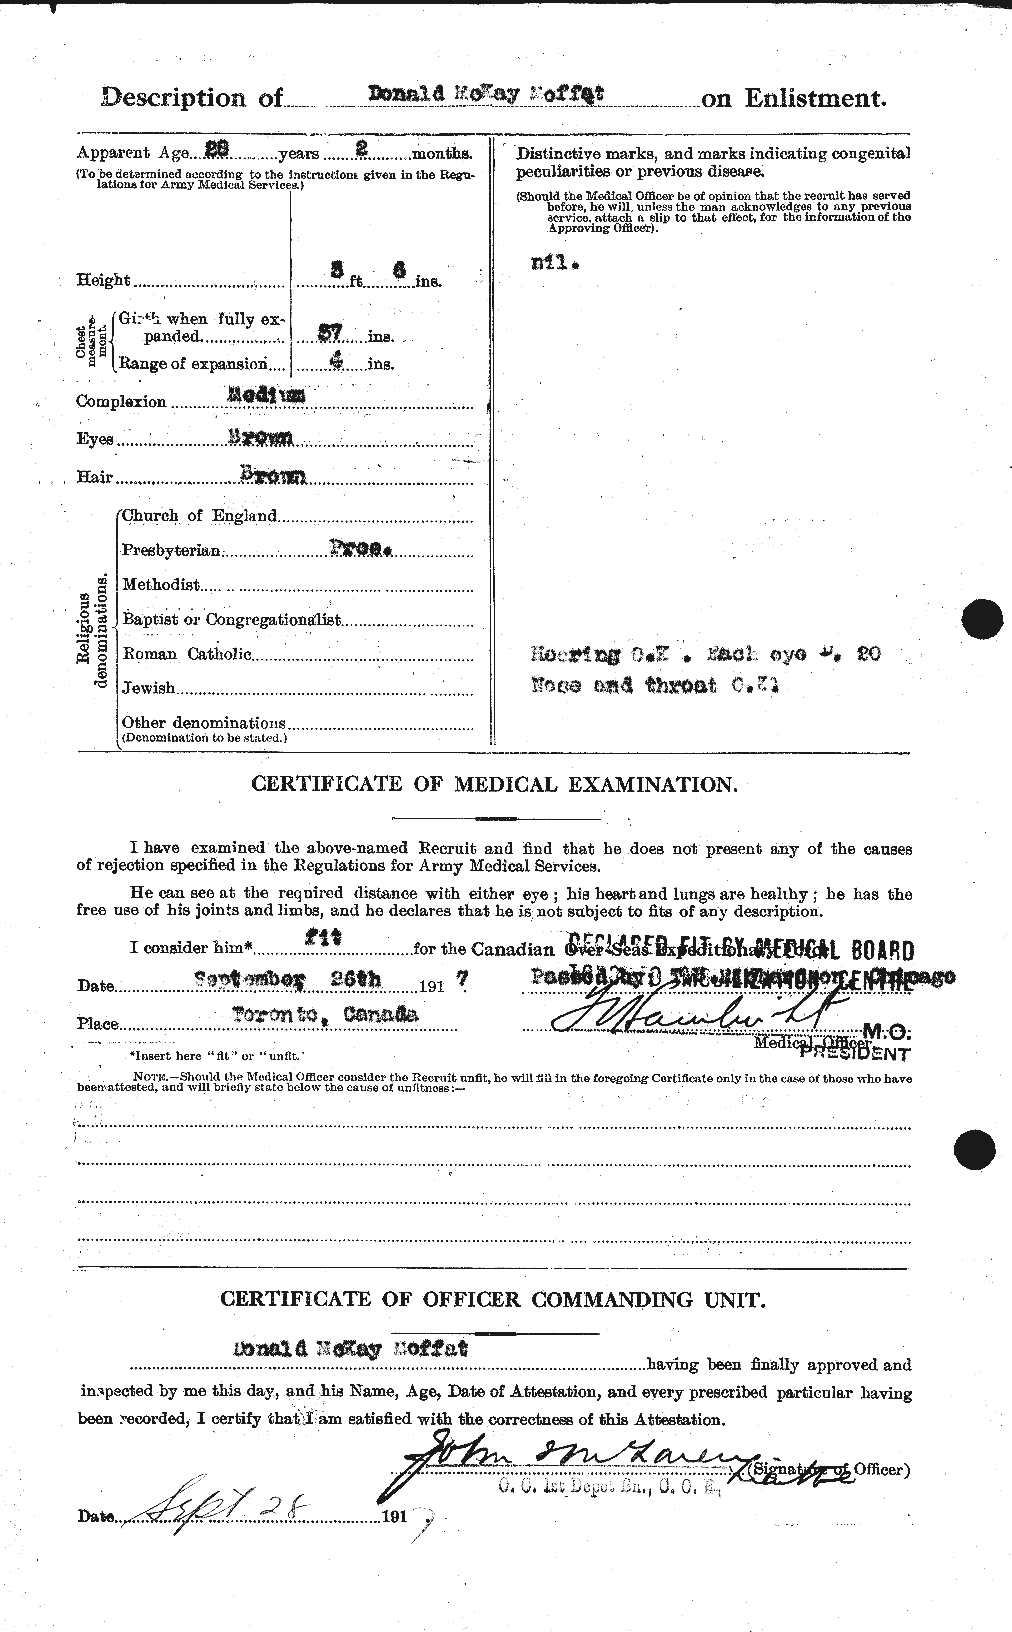 Personnel Records of the First World War - CEF 499005b